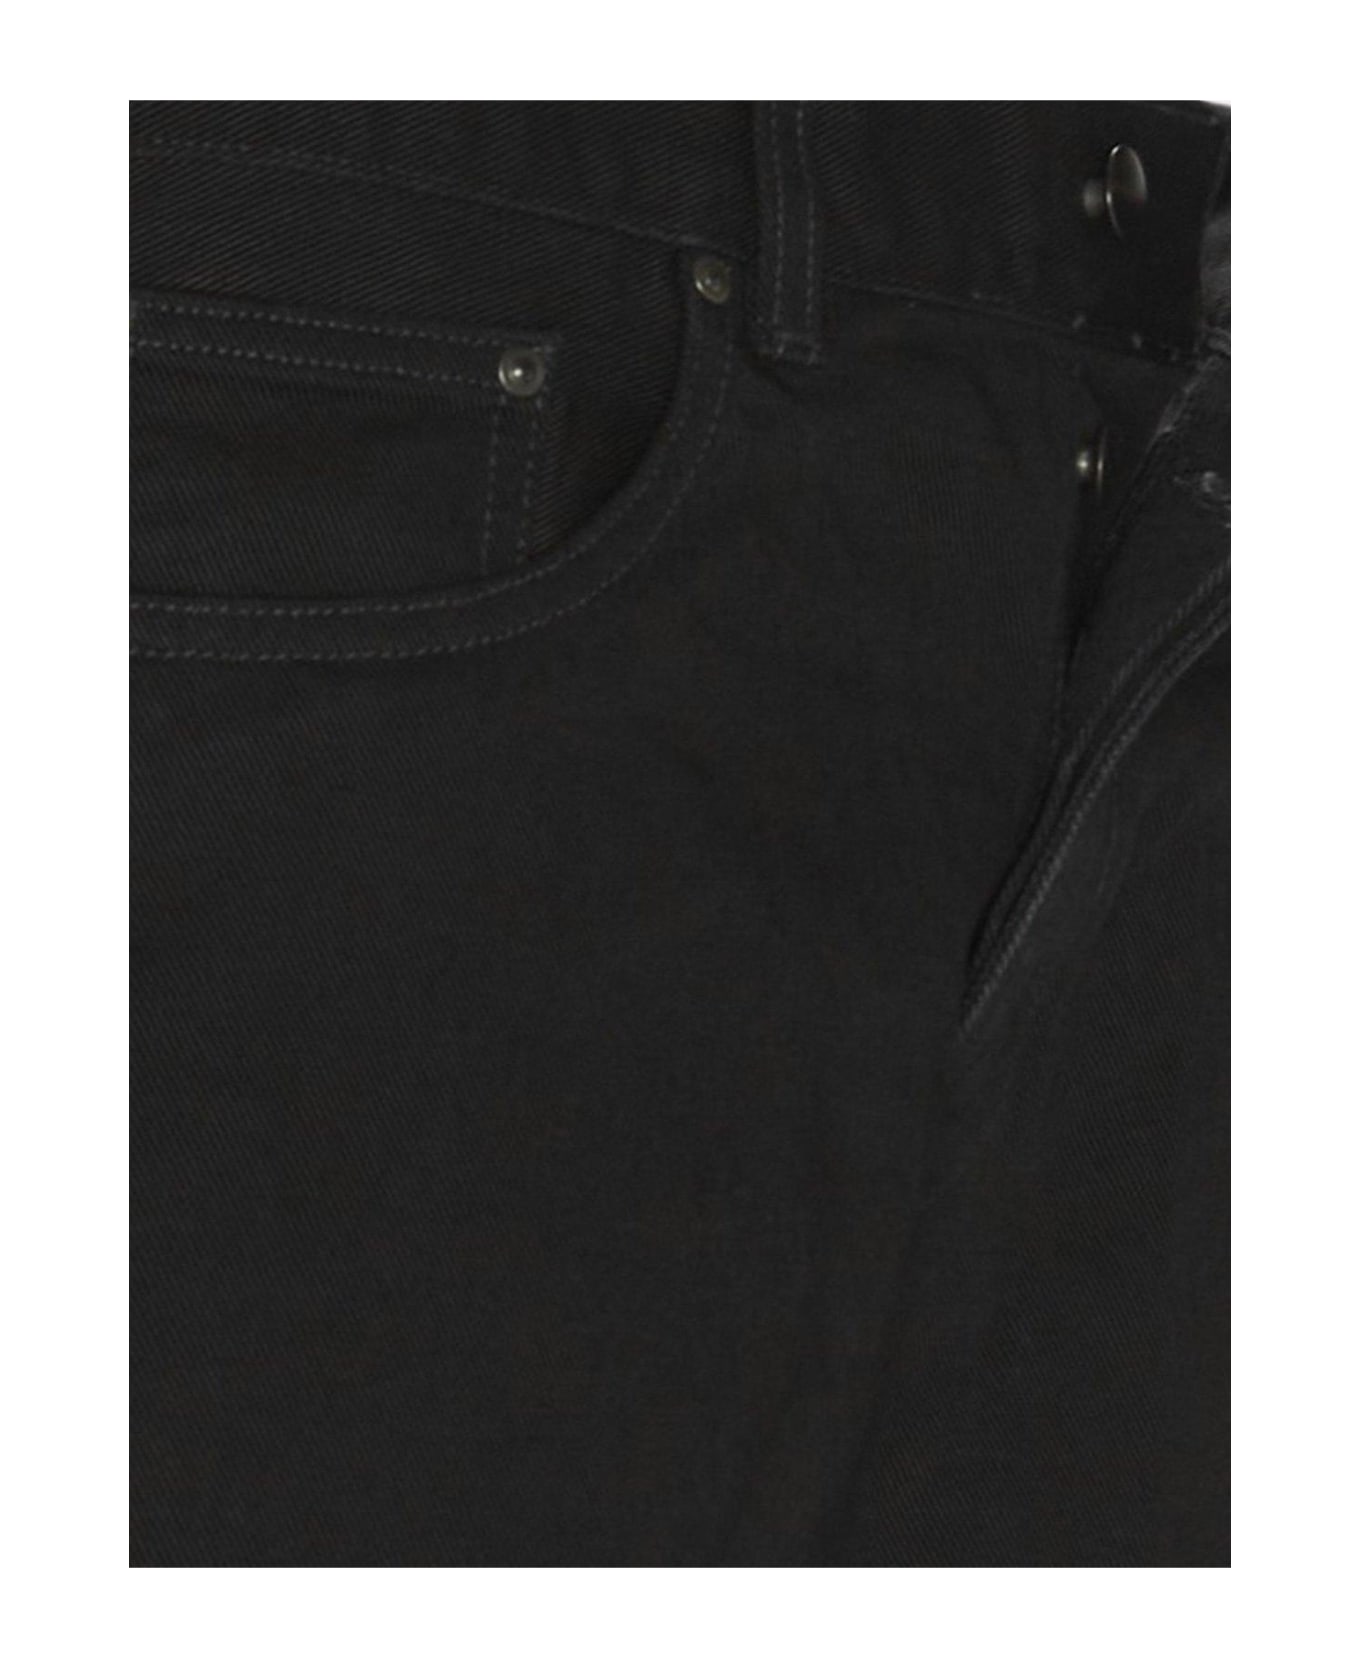 Carhartt Button Detailed Low-rise Jeans - Black